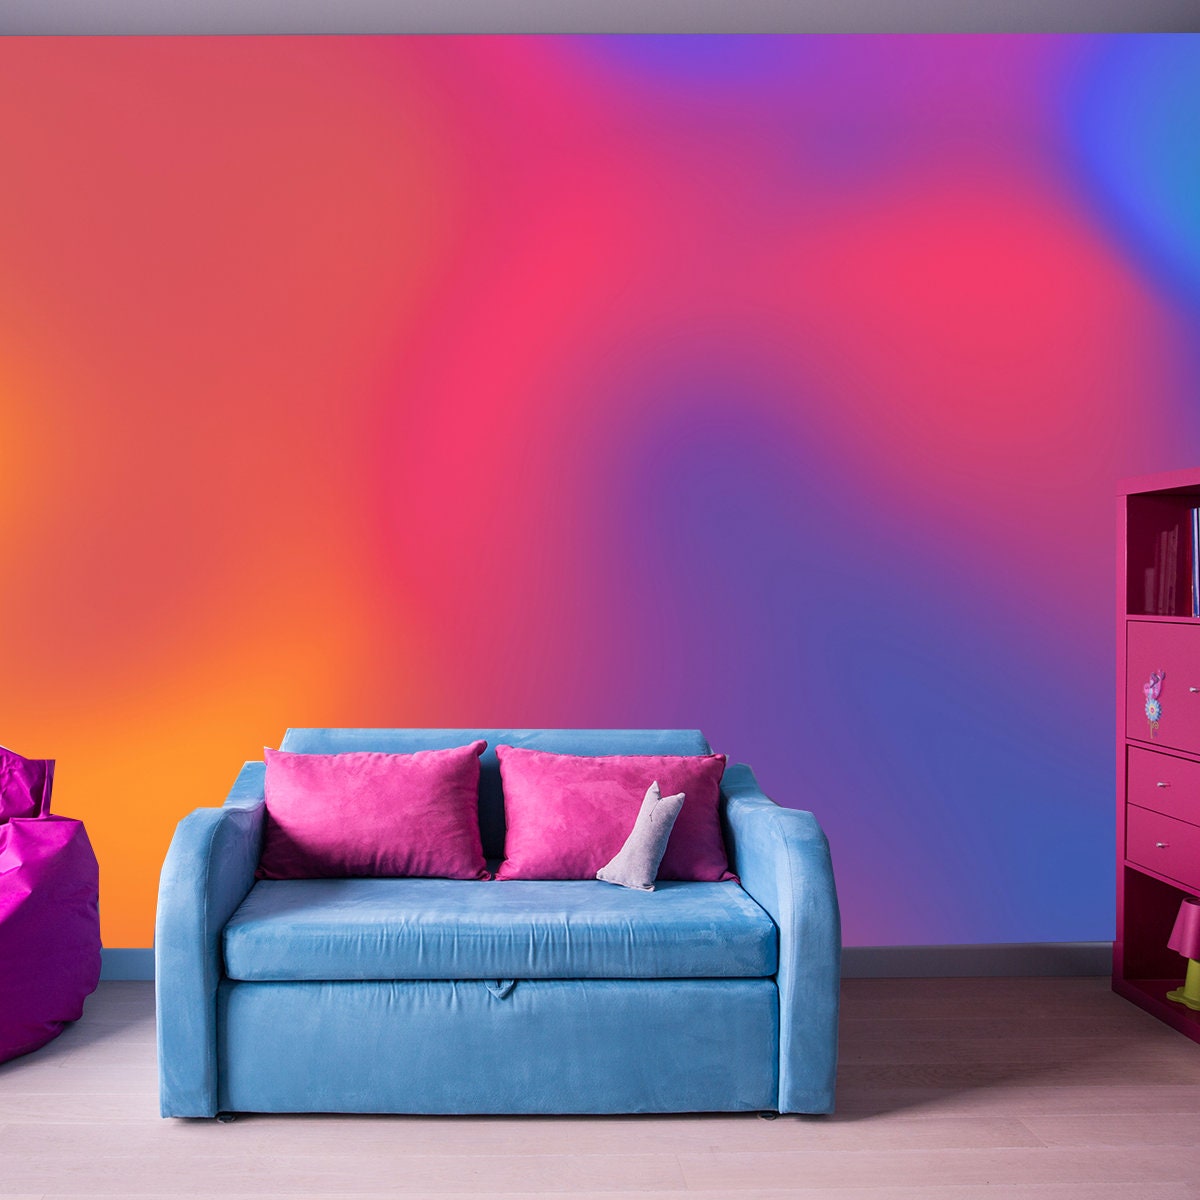 Blurred Colored Abstract Background. Smooth Transitions of Iridescent Colors. Colorful Gradient Wallpaper Girl Bedroom Mural